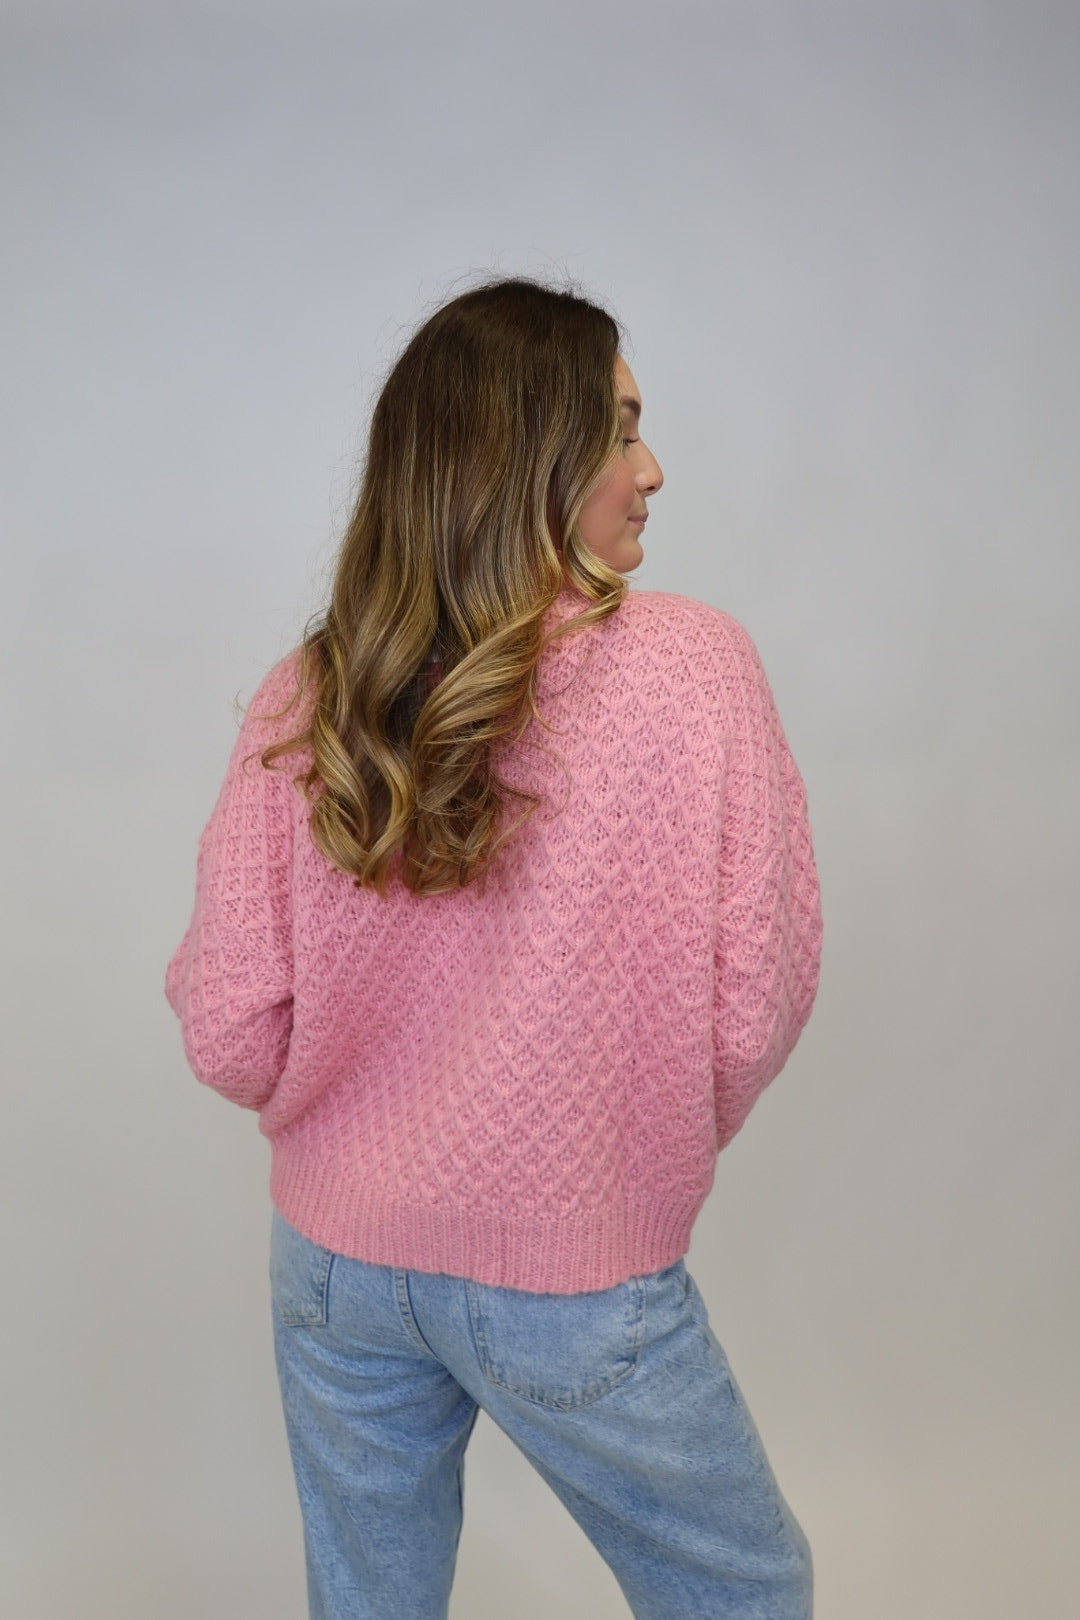 COTTON CANDY SKIES SWEATER